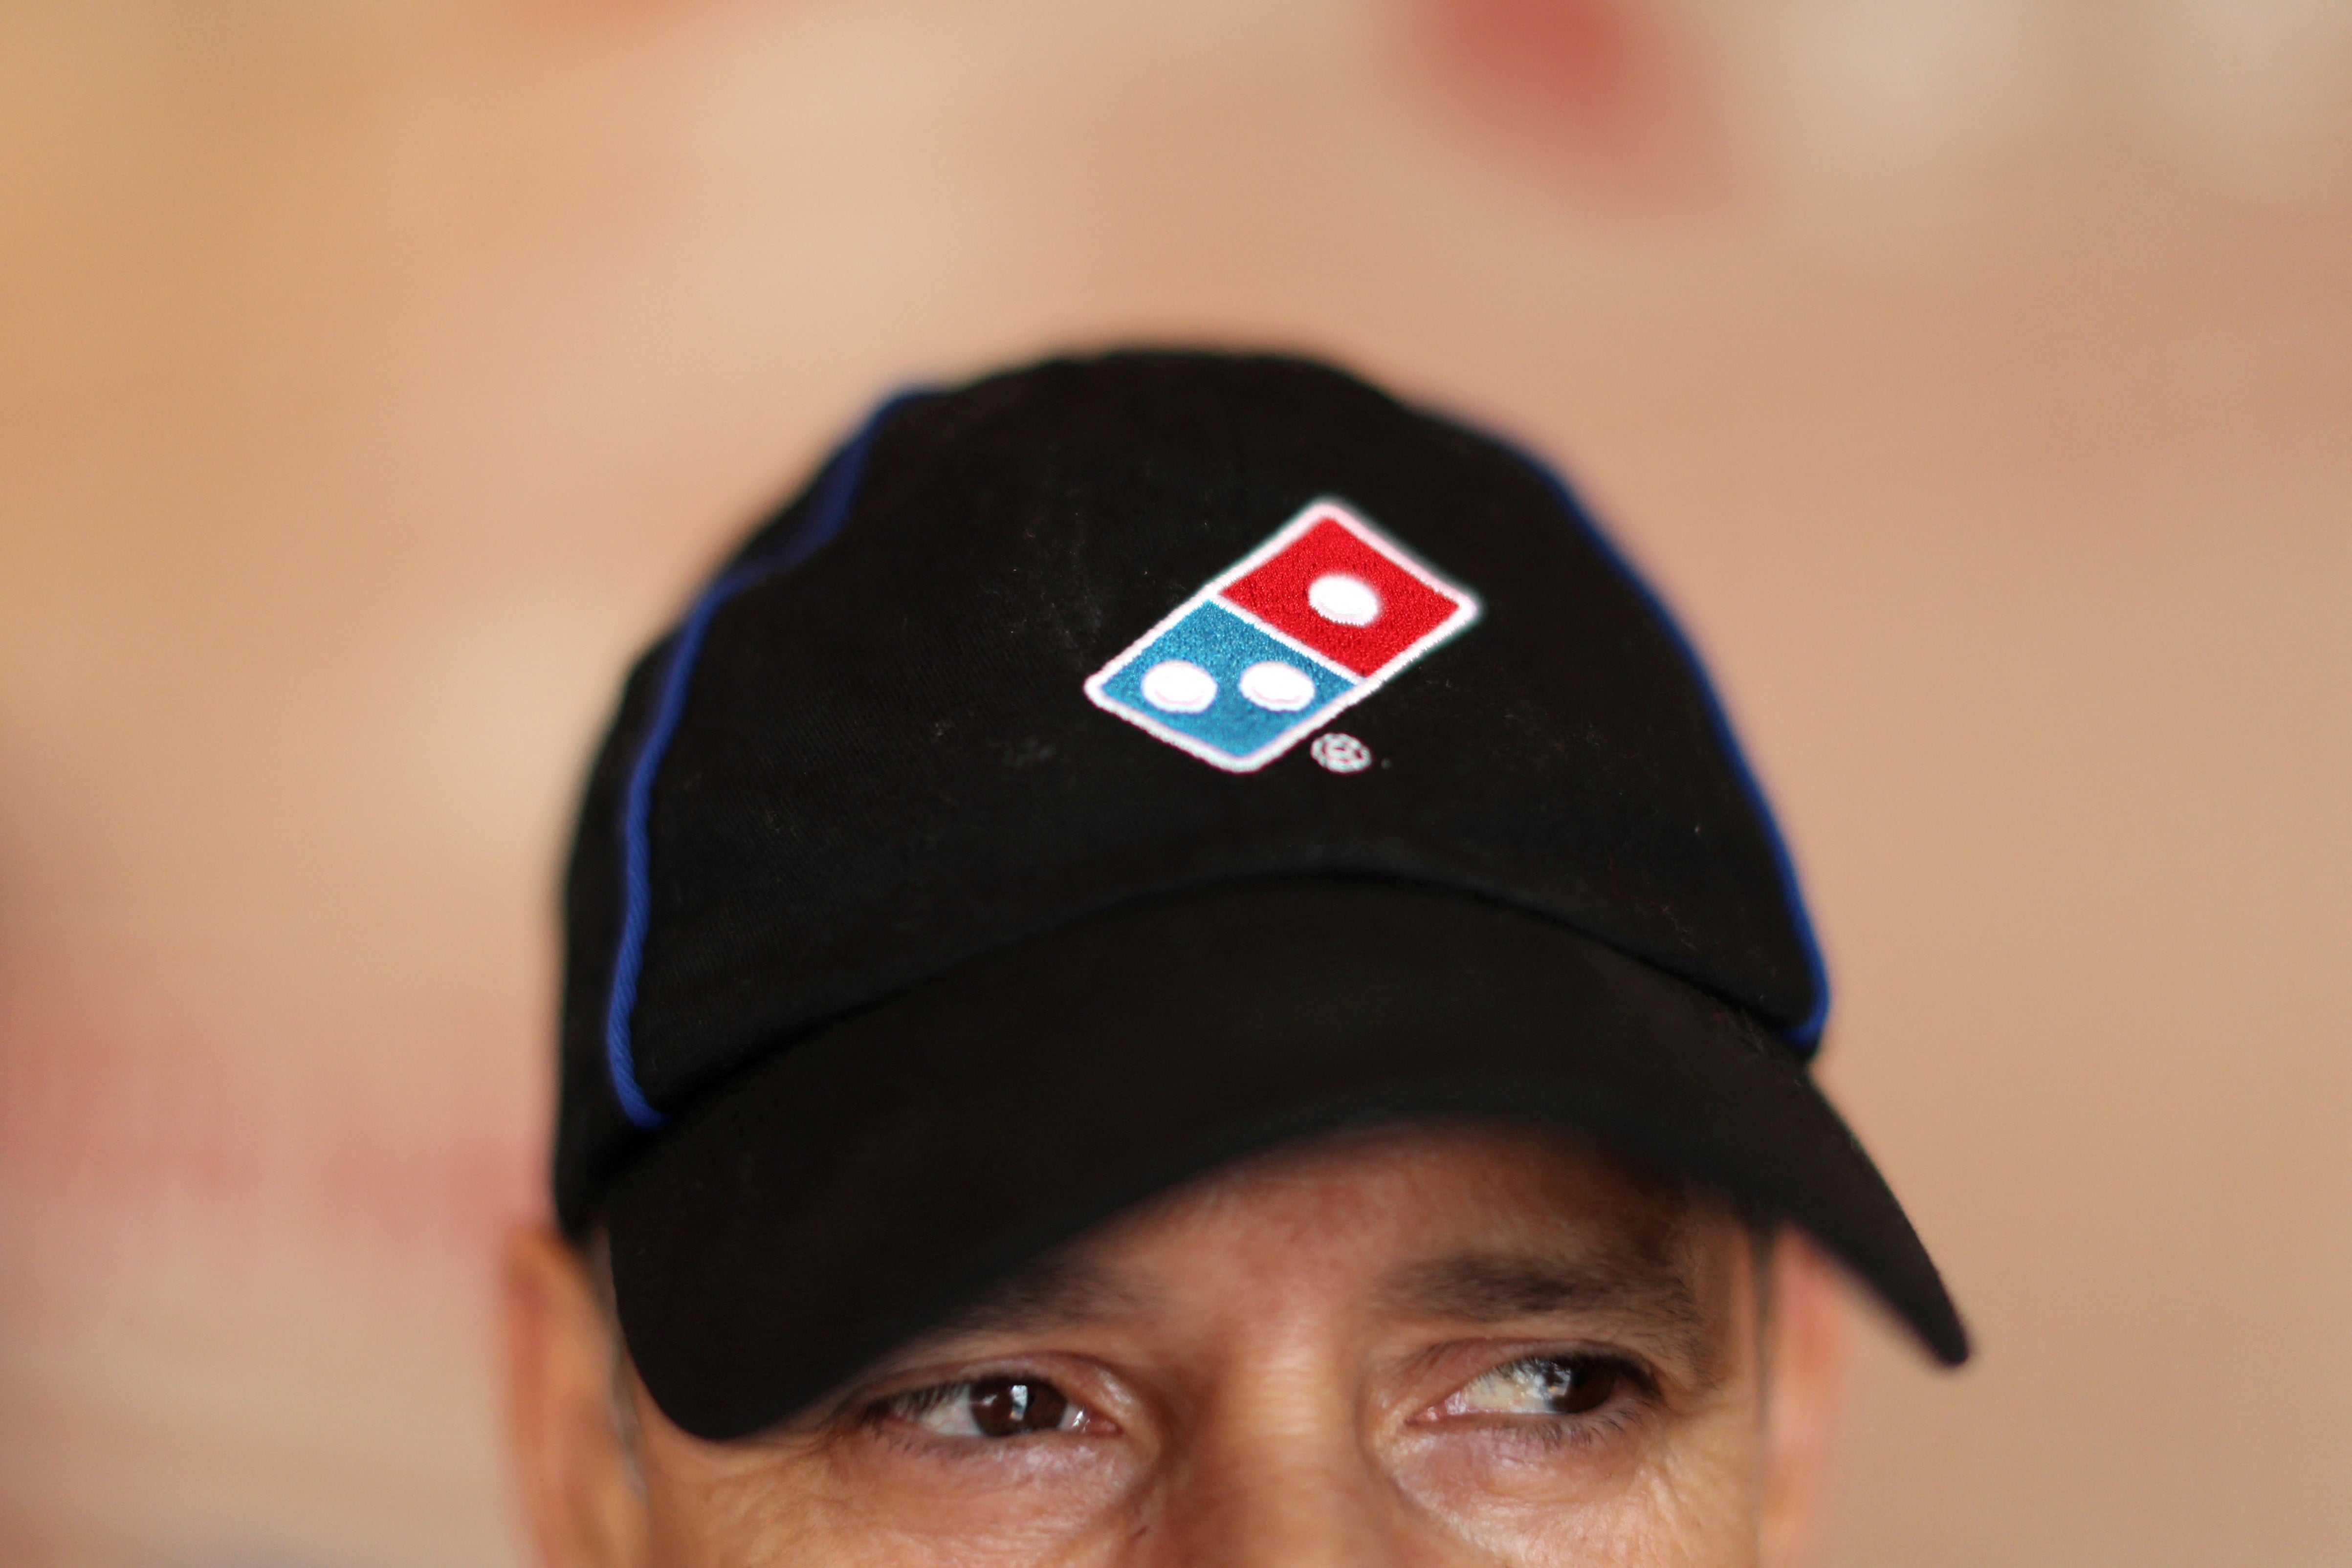 A Domino’s Pizza employee worker